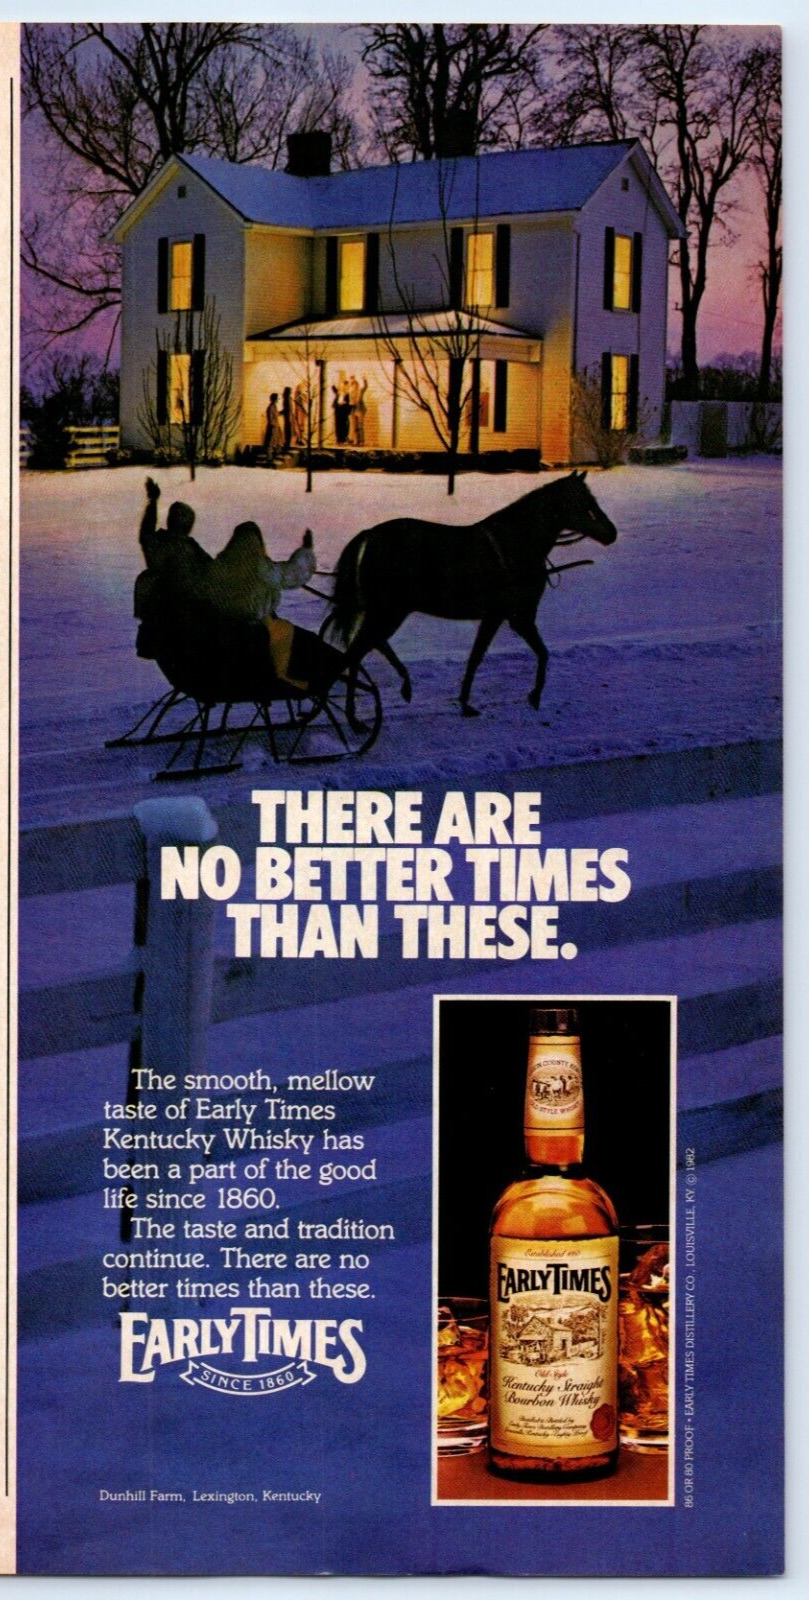 Early Times Kentucky Whisky NO BETTER TIMES 2/3pg 1983 Print Ad 8\